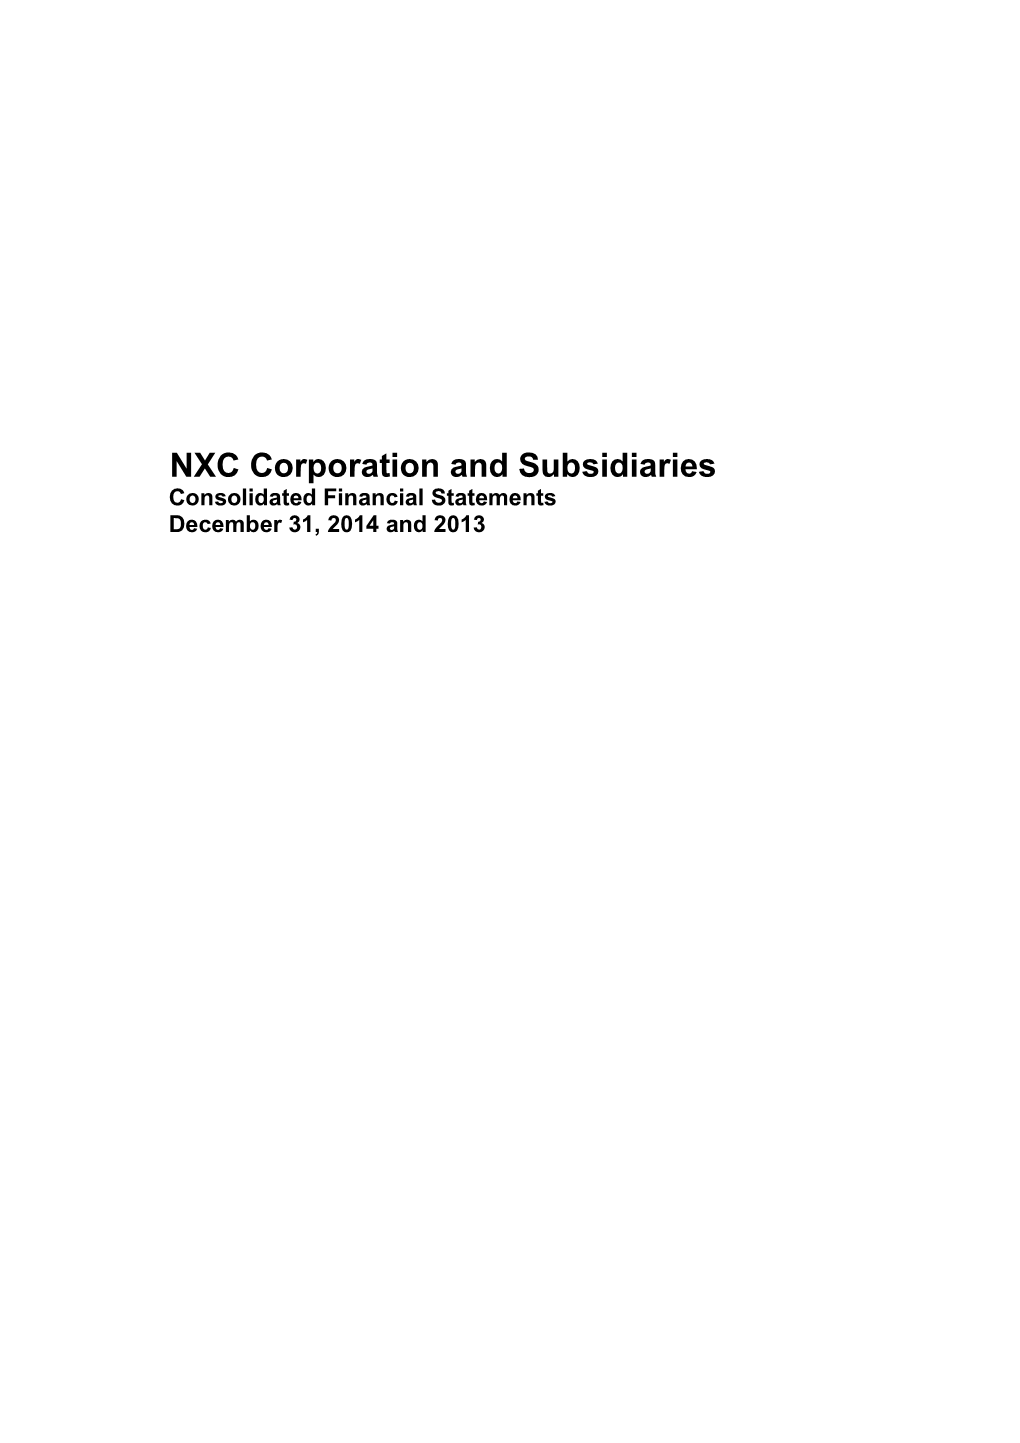 NXC Corporation and Subsidiaries Consolidated Financial Statements December 31, 2014 and 2013 NXC Corporation and Subsidiaries Index December 31, 2014 and 2013